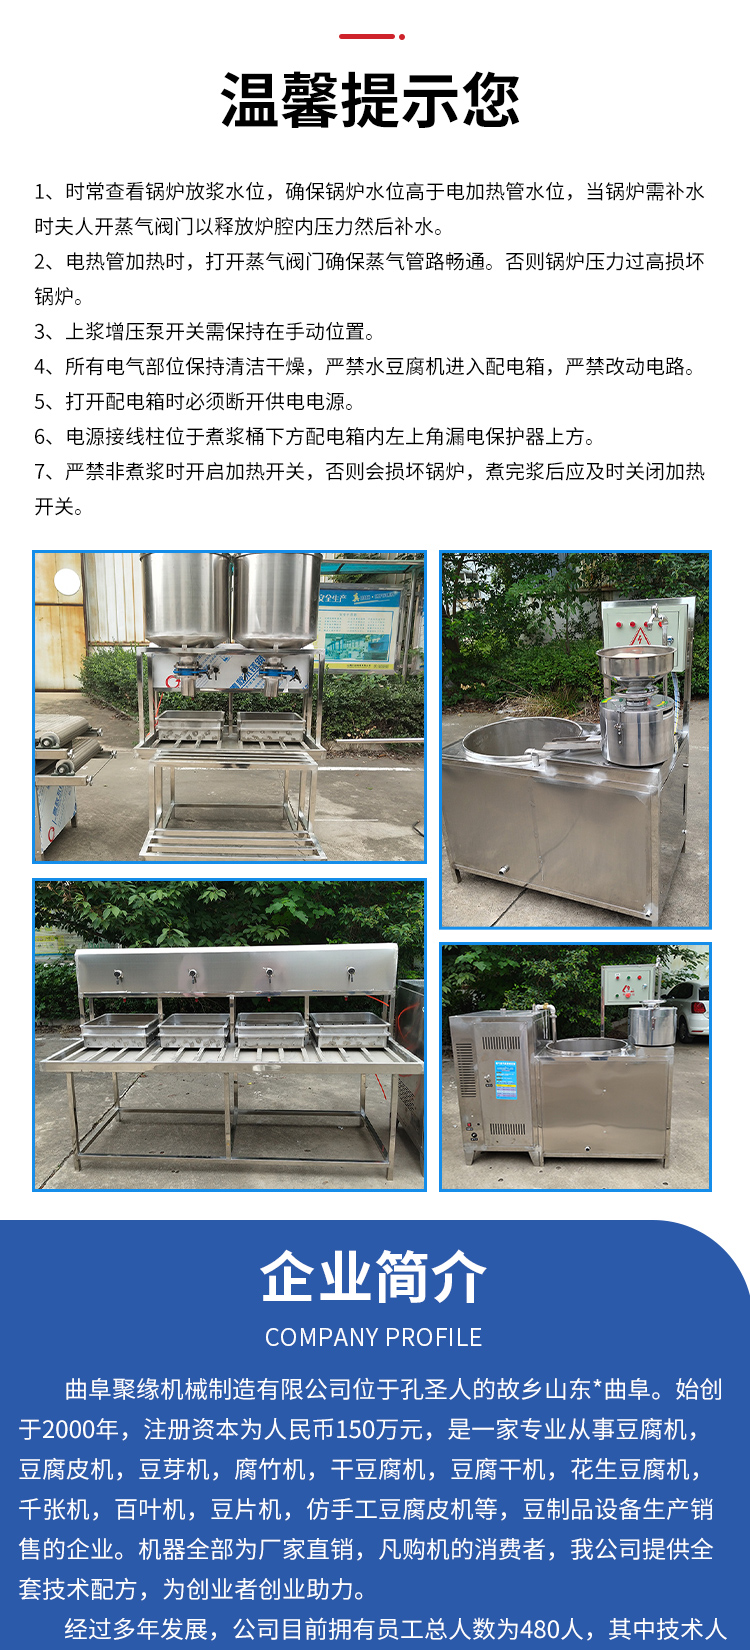 Large scale fully automatic tofu making machine with dual tofu grinding machine, bean products and food machinery